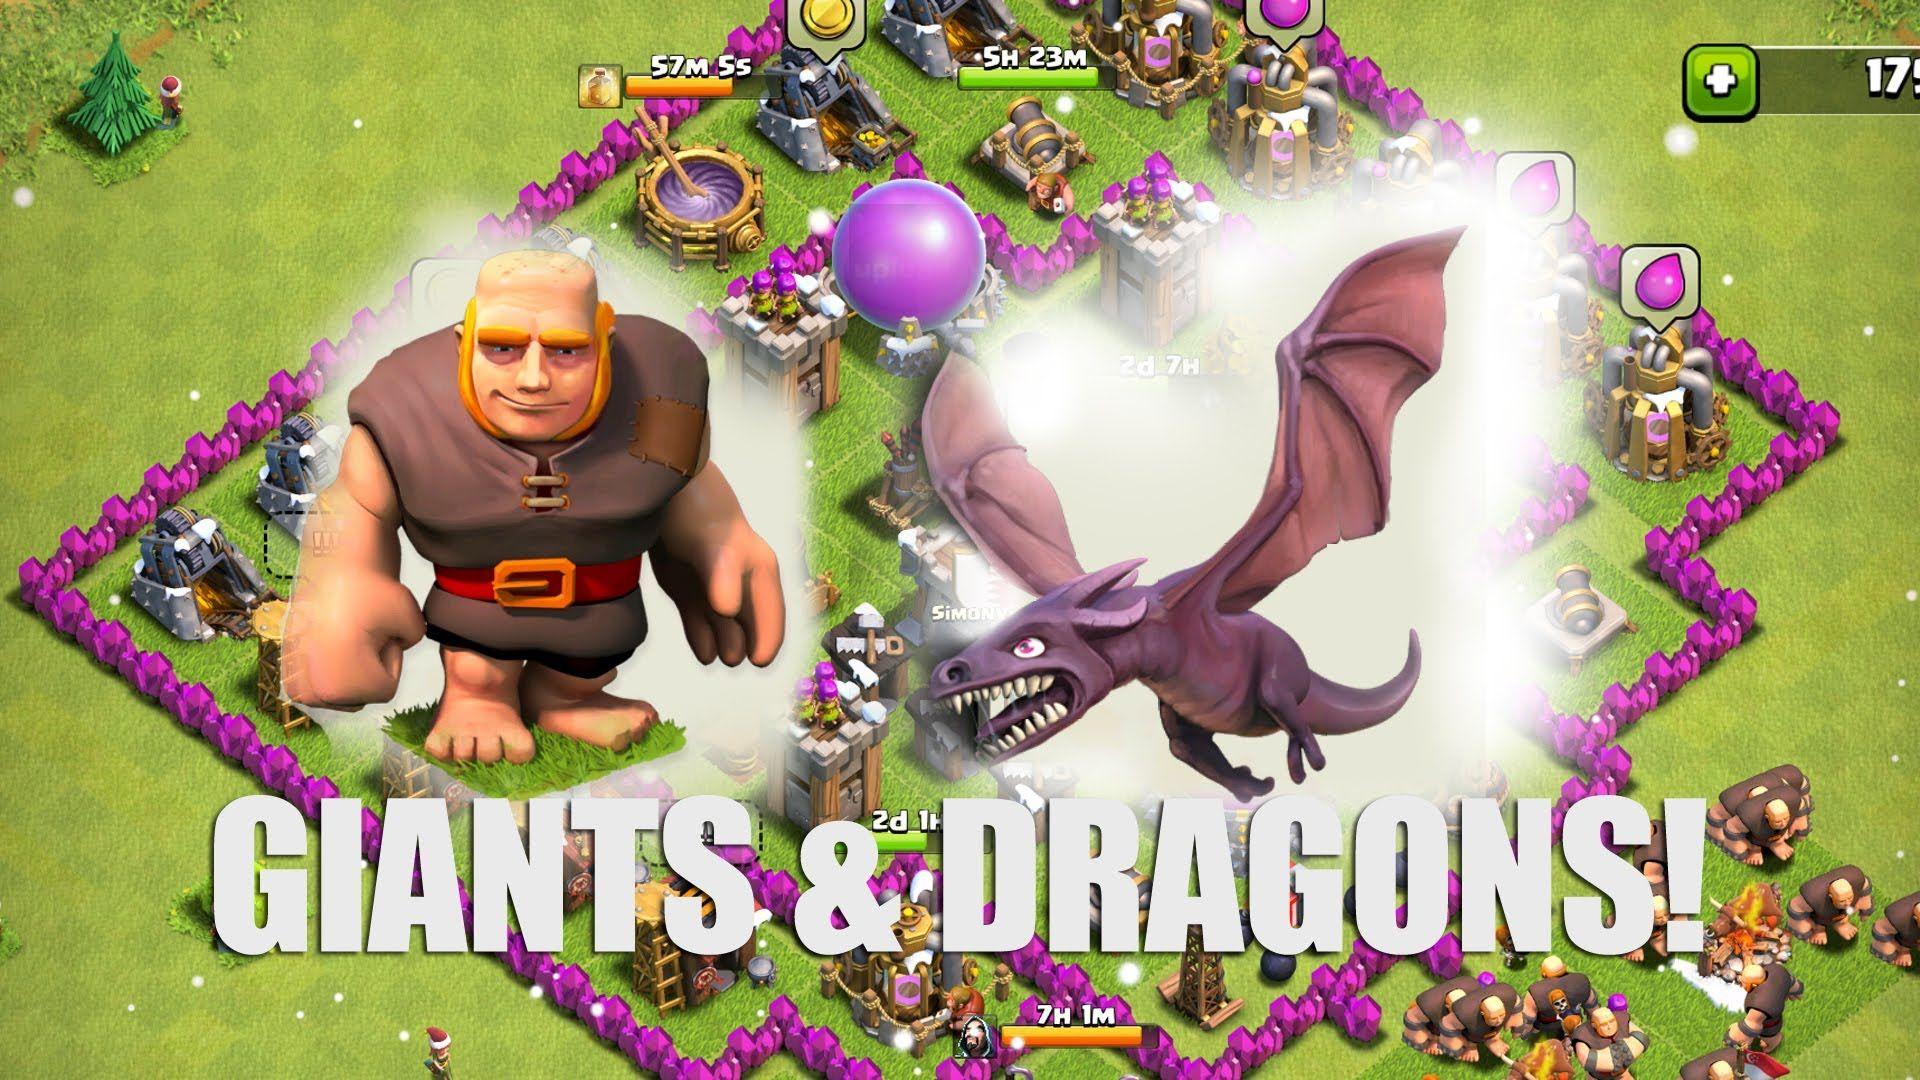 Clash of Clans 12 and Dragons!